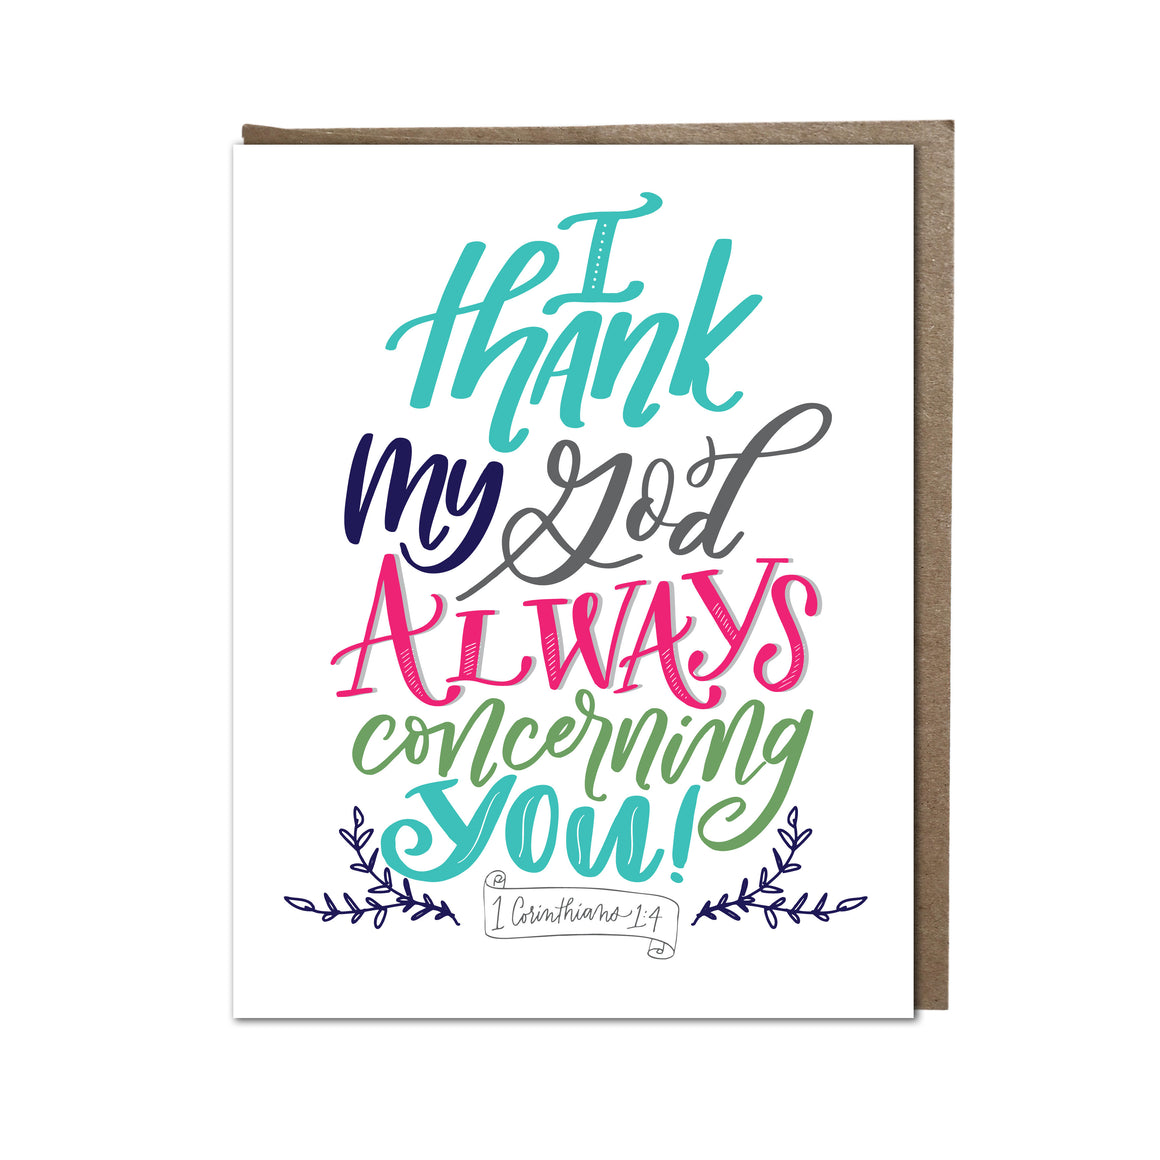 "Thank God for You" card